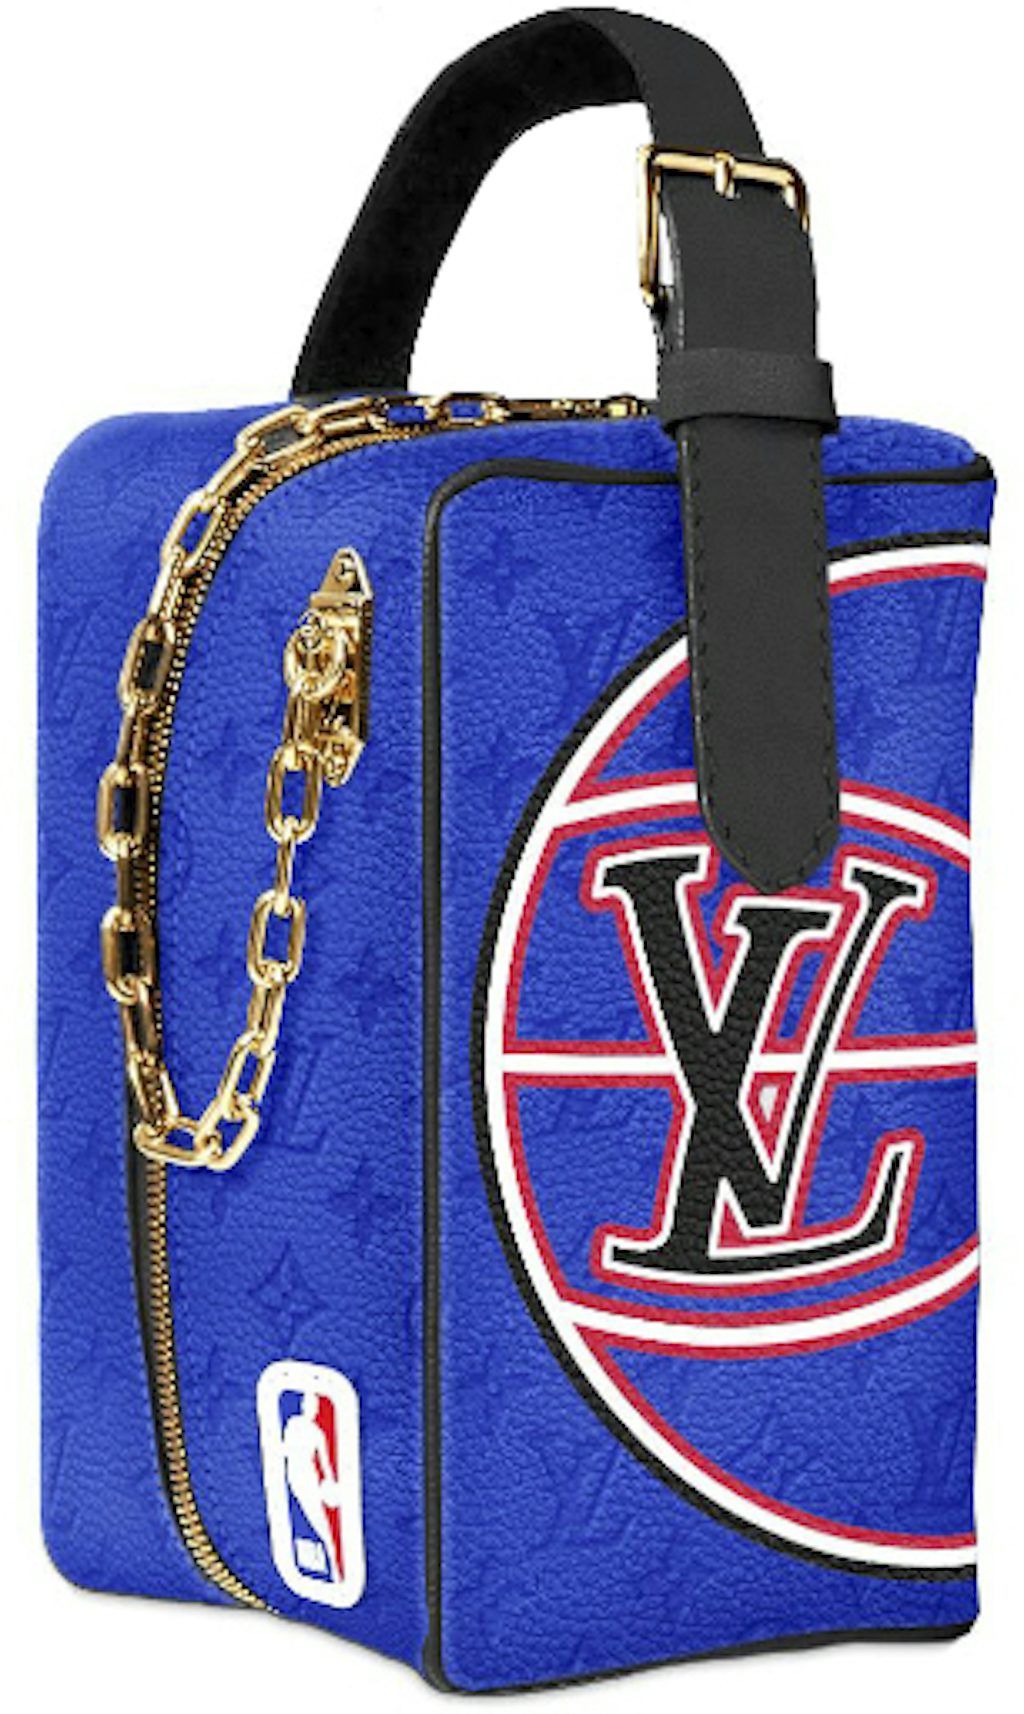 Louis Vuitton x NBA Dopp Kit Blue in Coated Canvas/Leather with